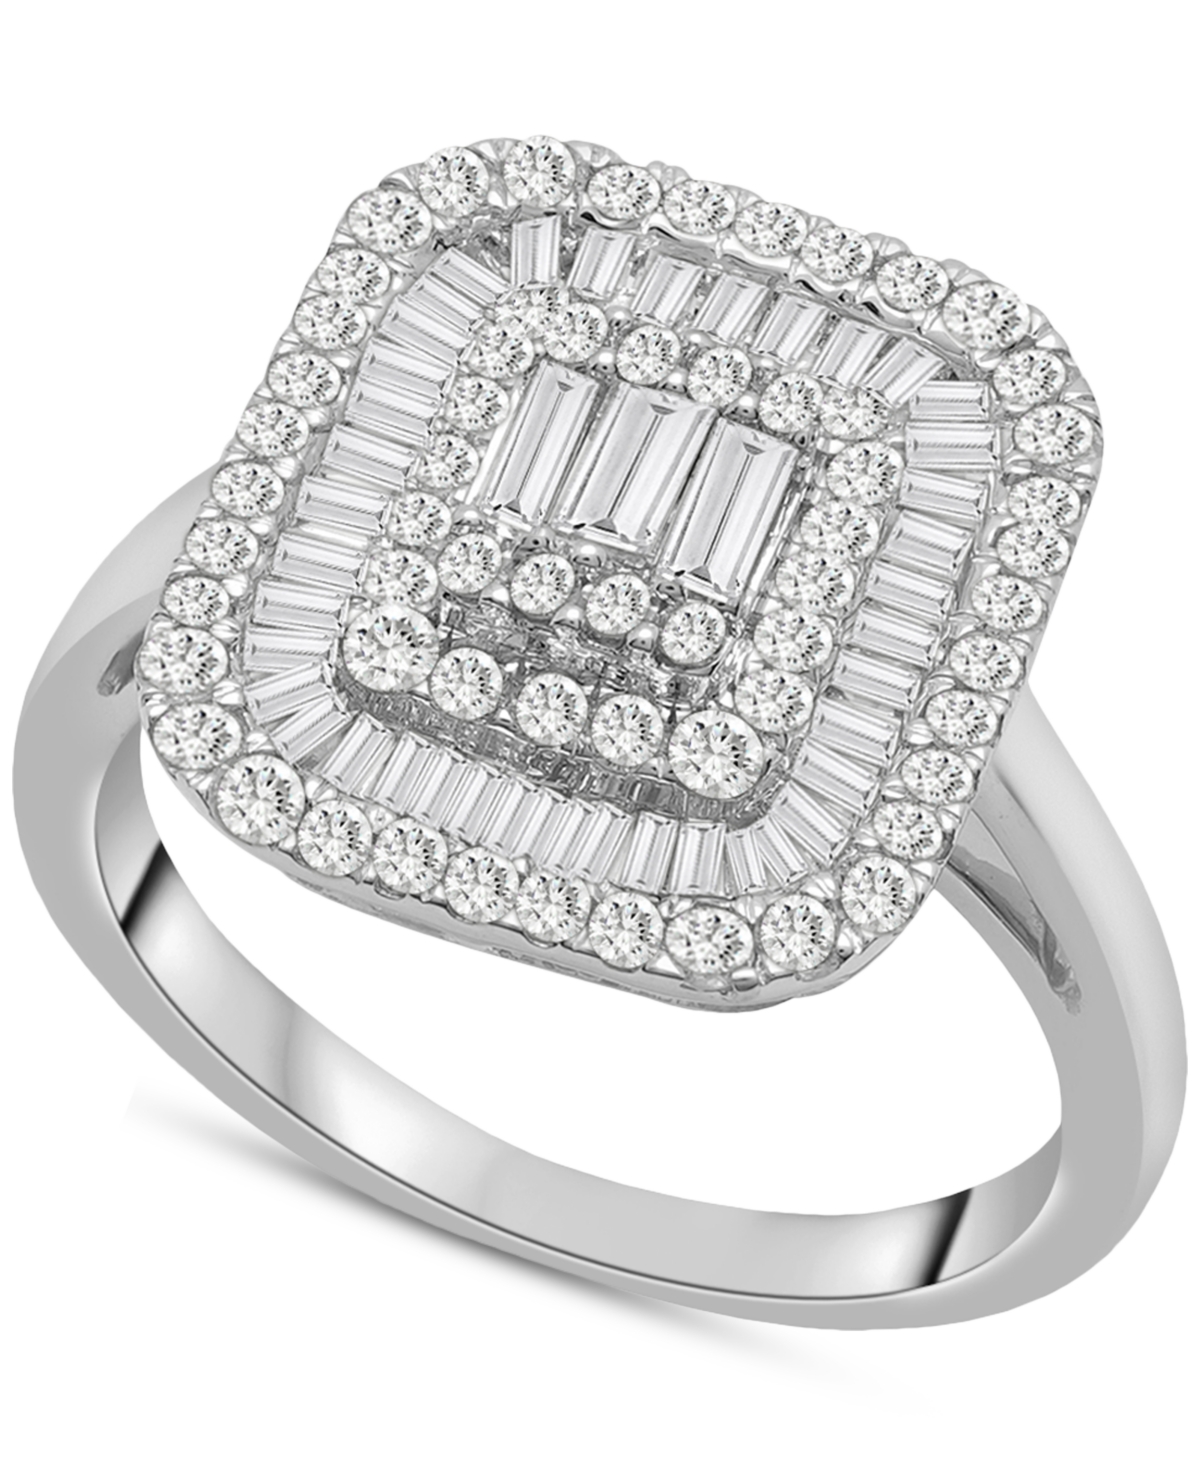 Diamond Round & Baguette Square Halo Cluster Ring (1 ct. t.w.) in 14k White Gold, Created for Macy's - White Gold